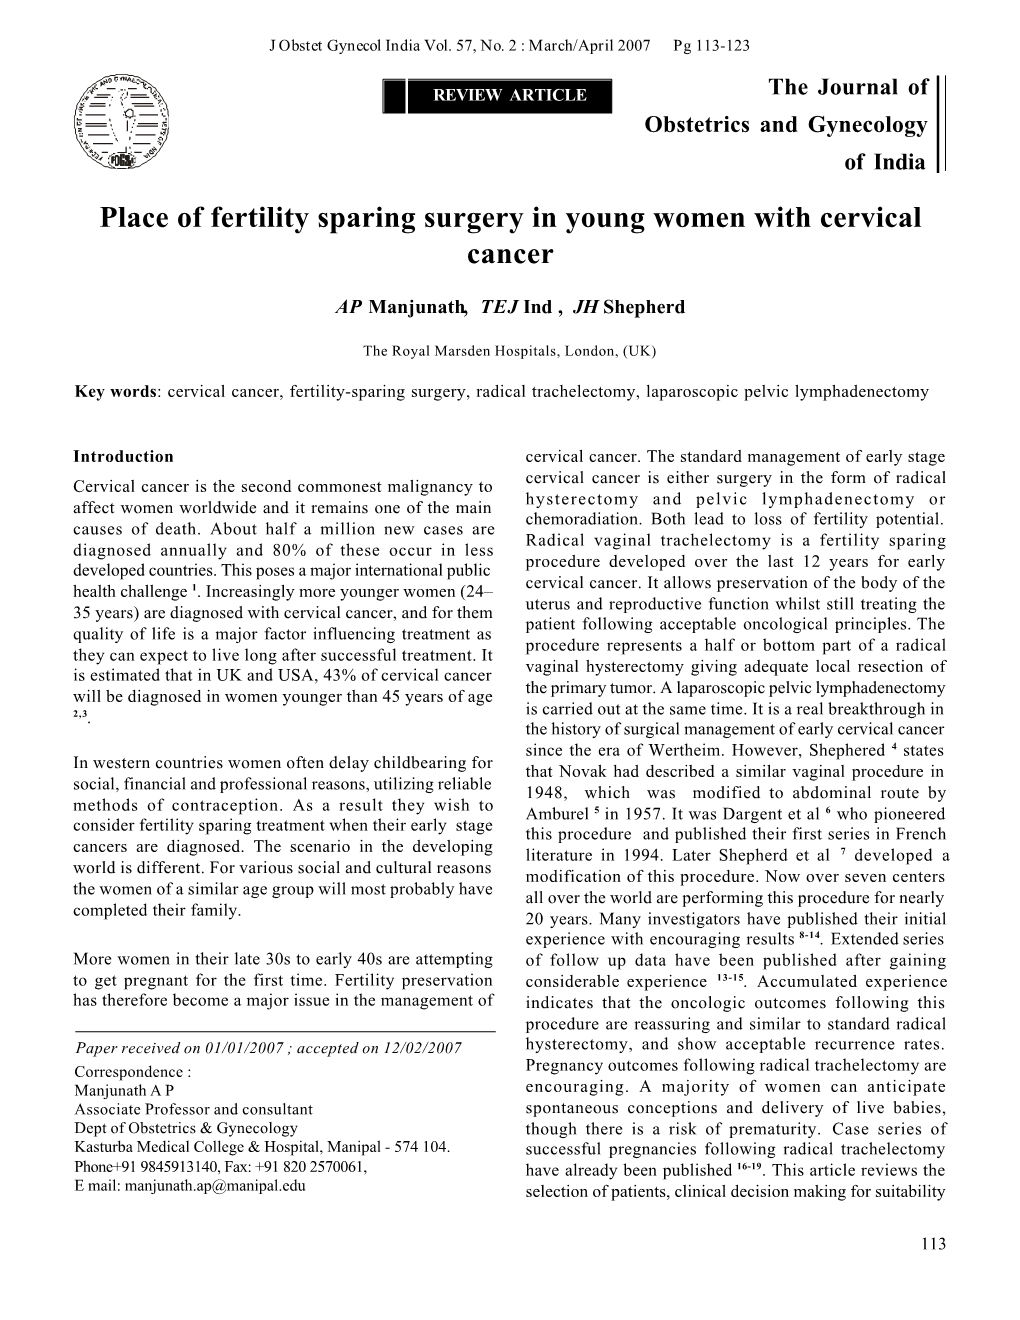 Place of Fertility Sparing Surgery in Young Women with Cervical Cancer